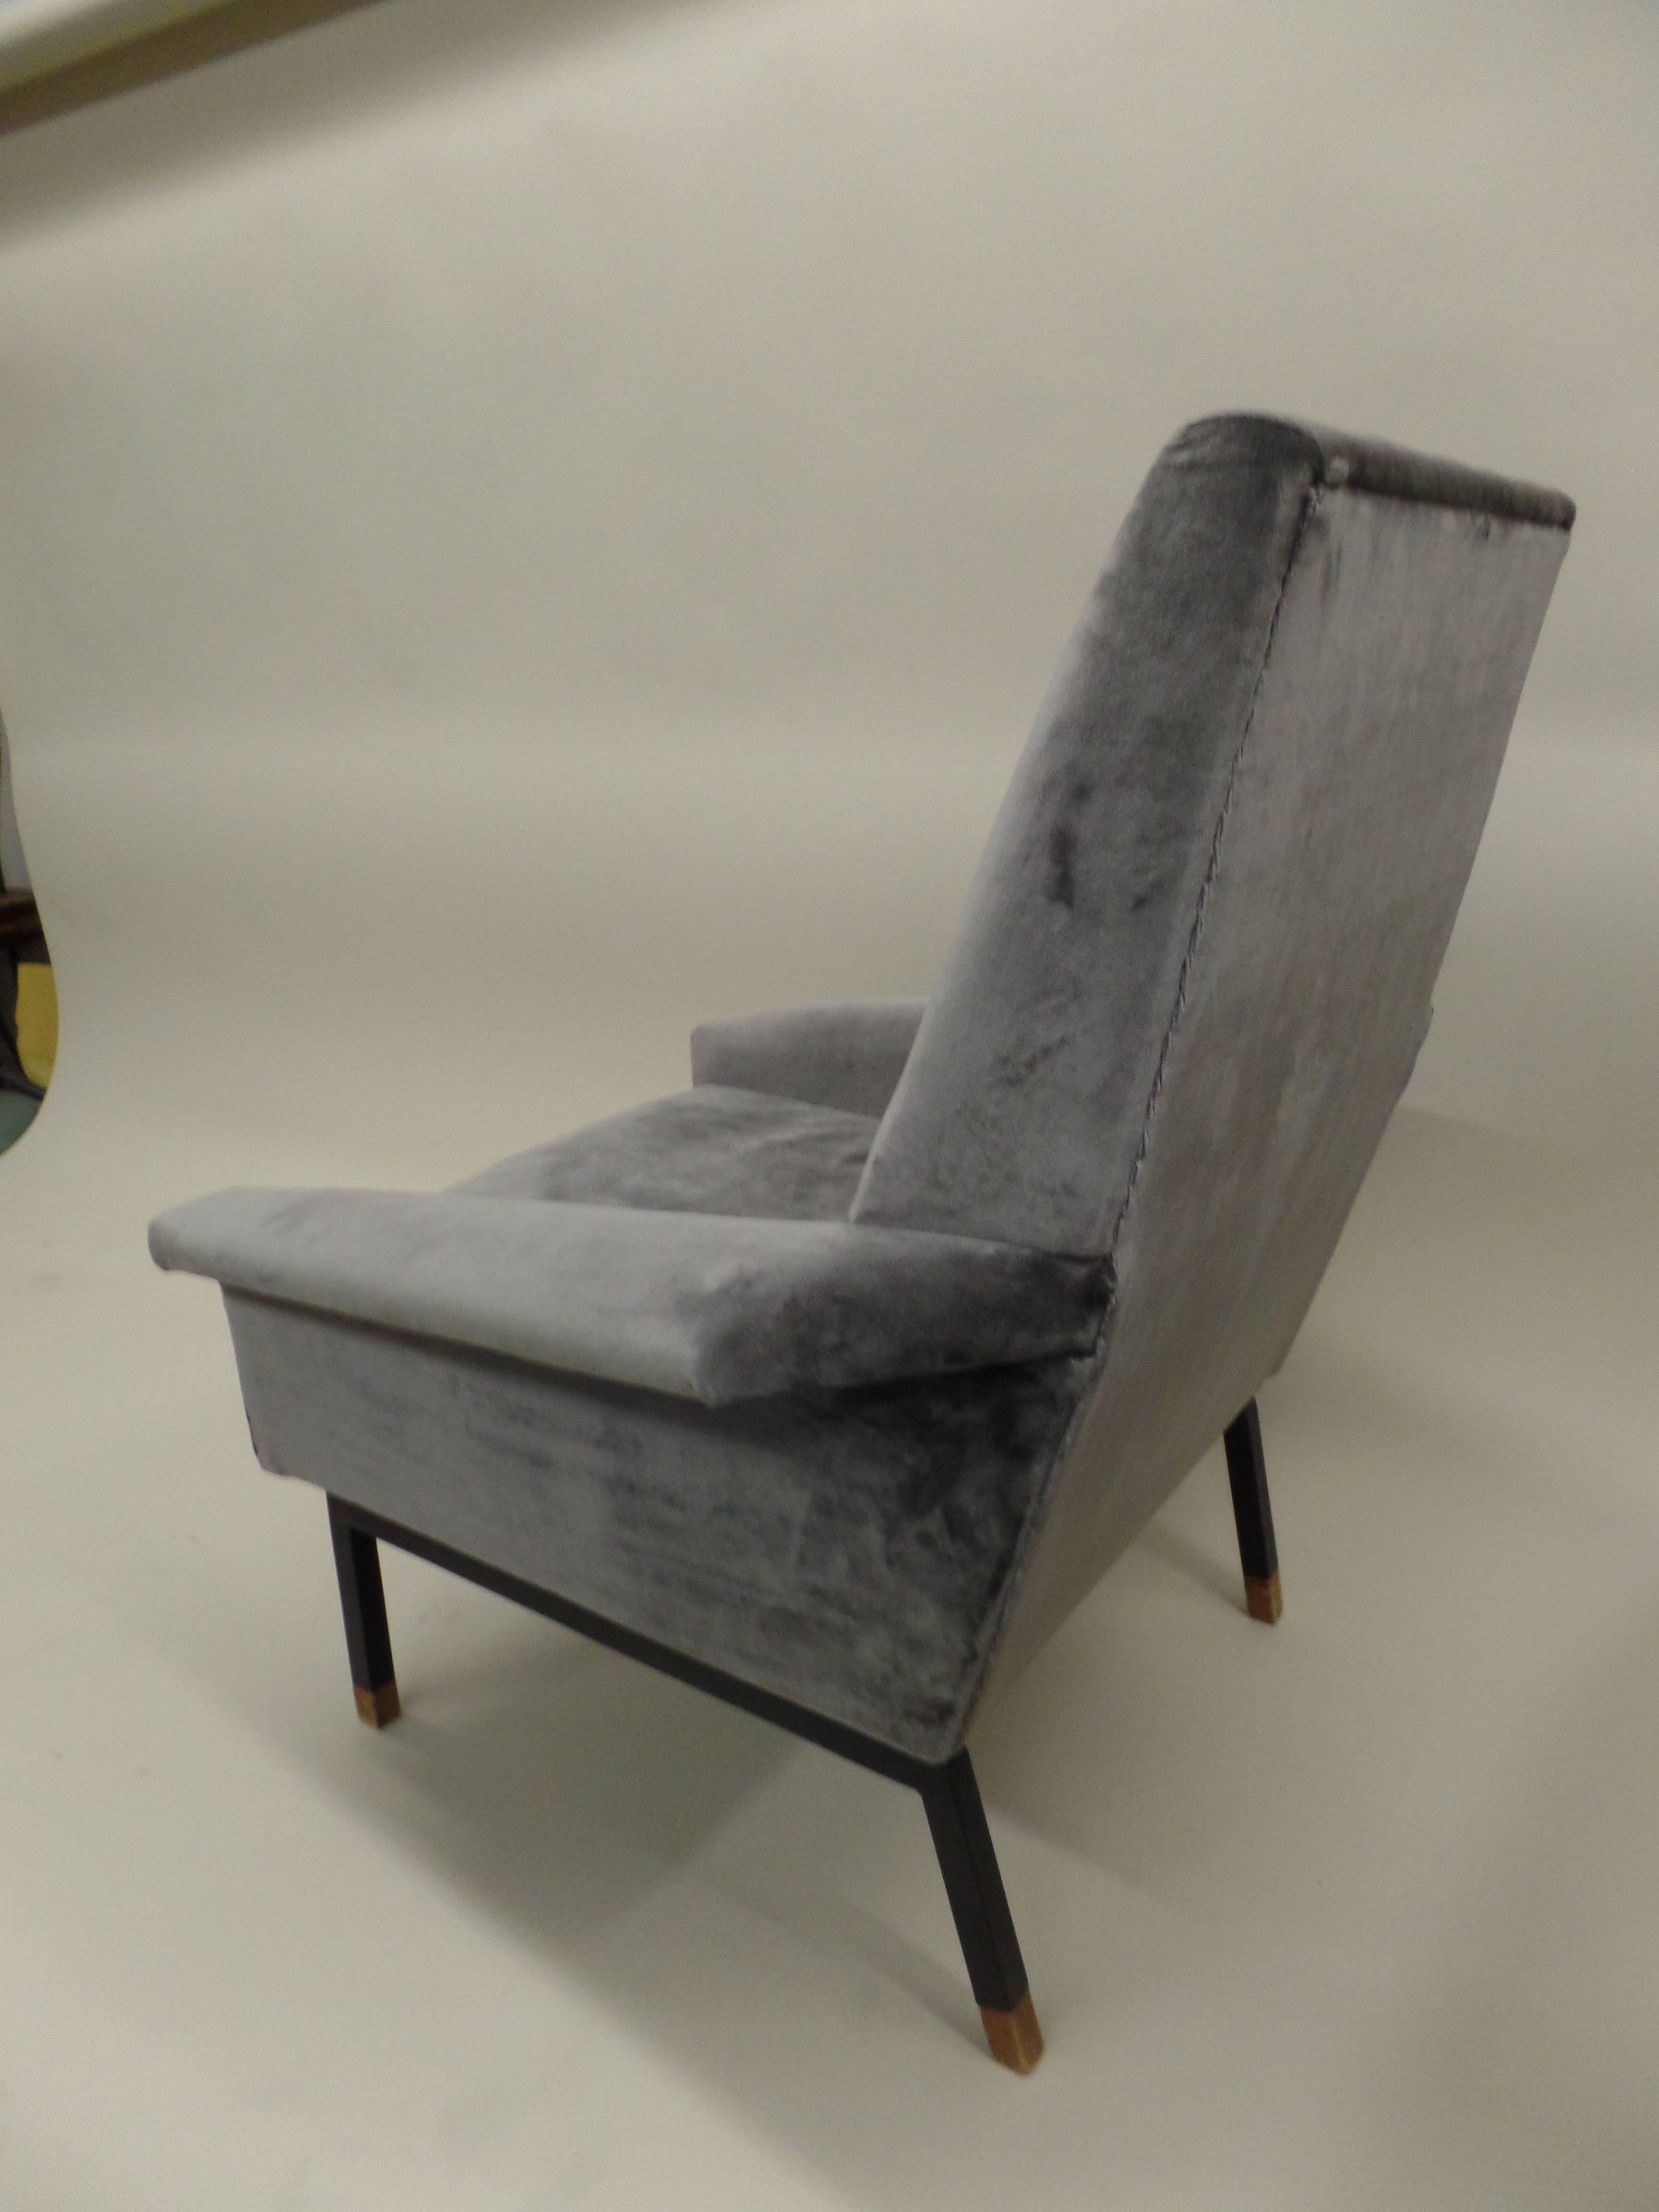 20th Century Italian Cantilevered Mid-Century Modern Lounge Chairs, Gianfranco Frattini, Pair For Sale